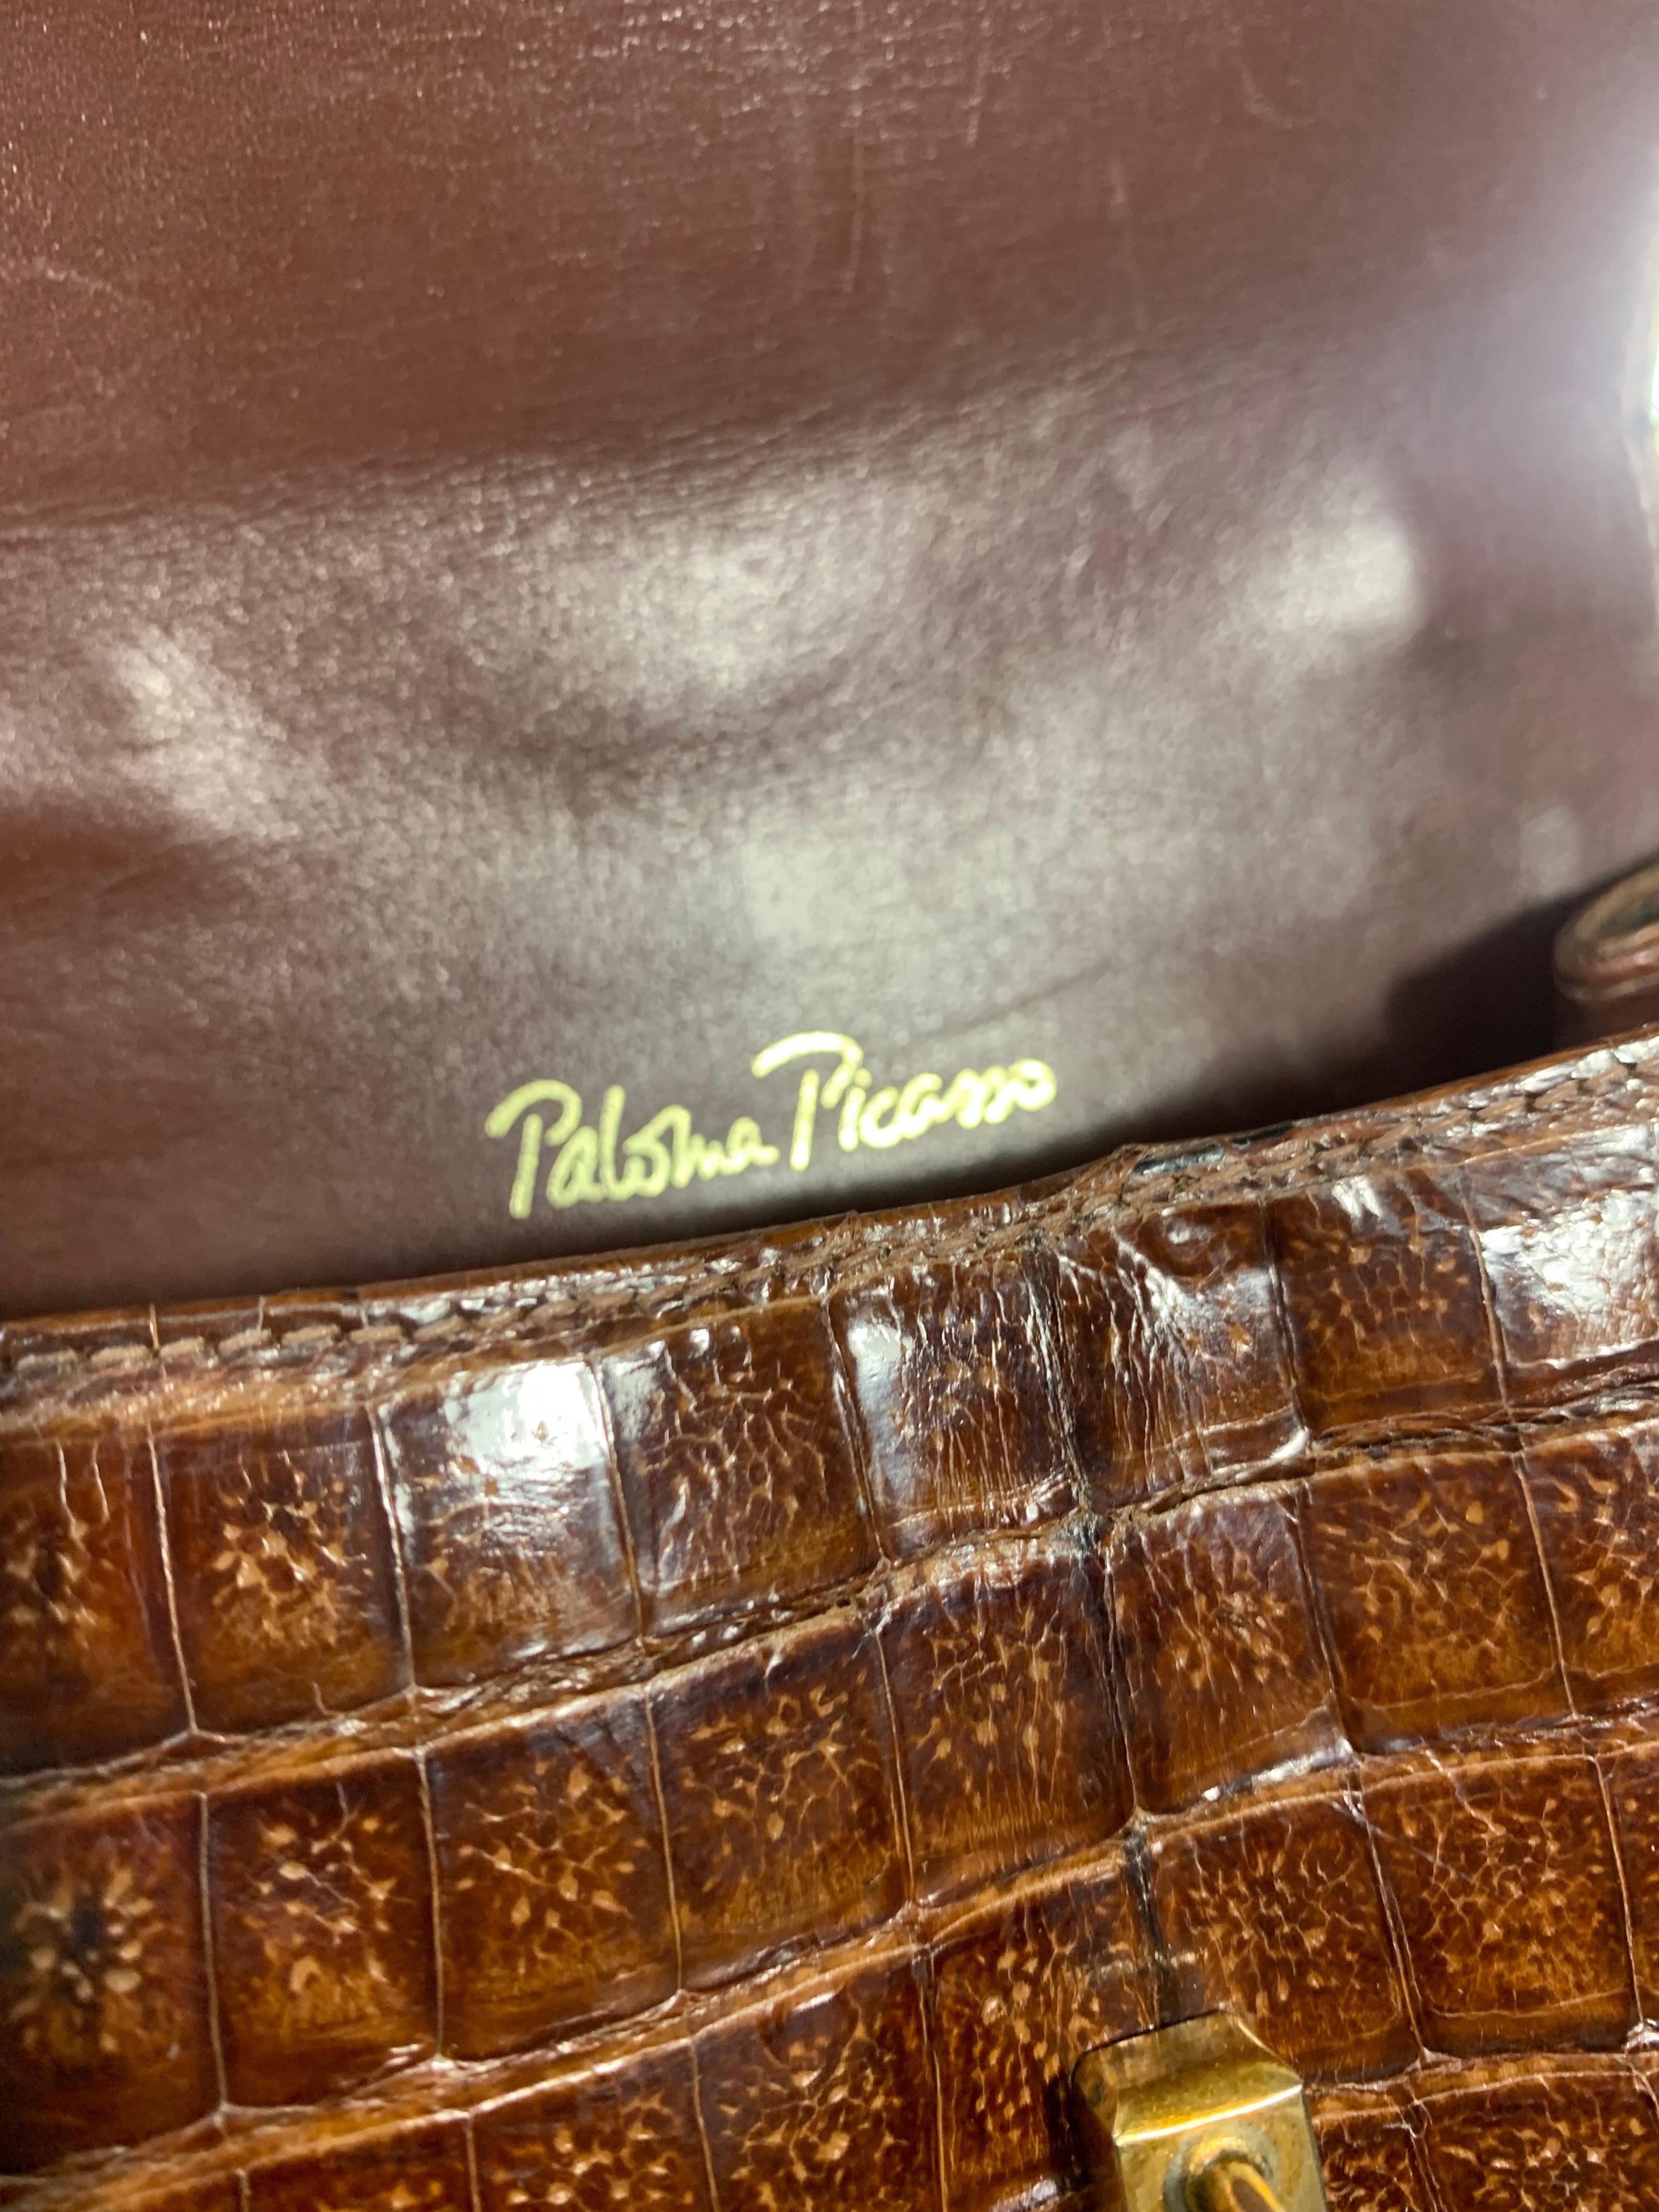 1990 Paloma Picasso Brown Alligator Shoulder Bag w Heavy Rope Chain Strap For Sale 2